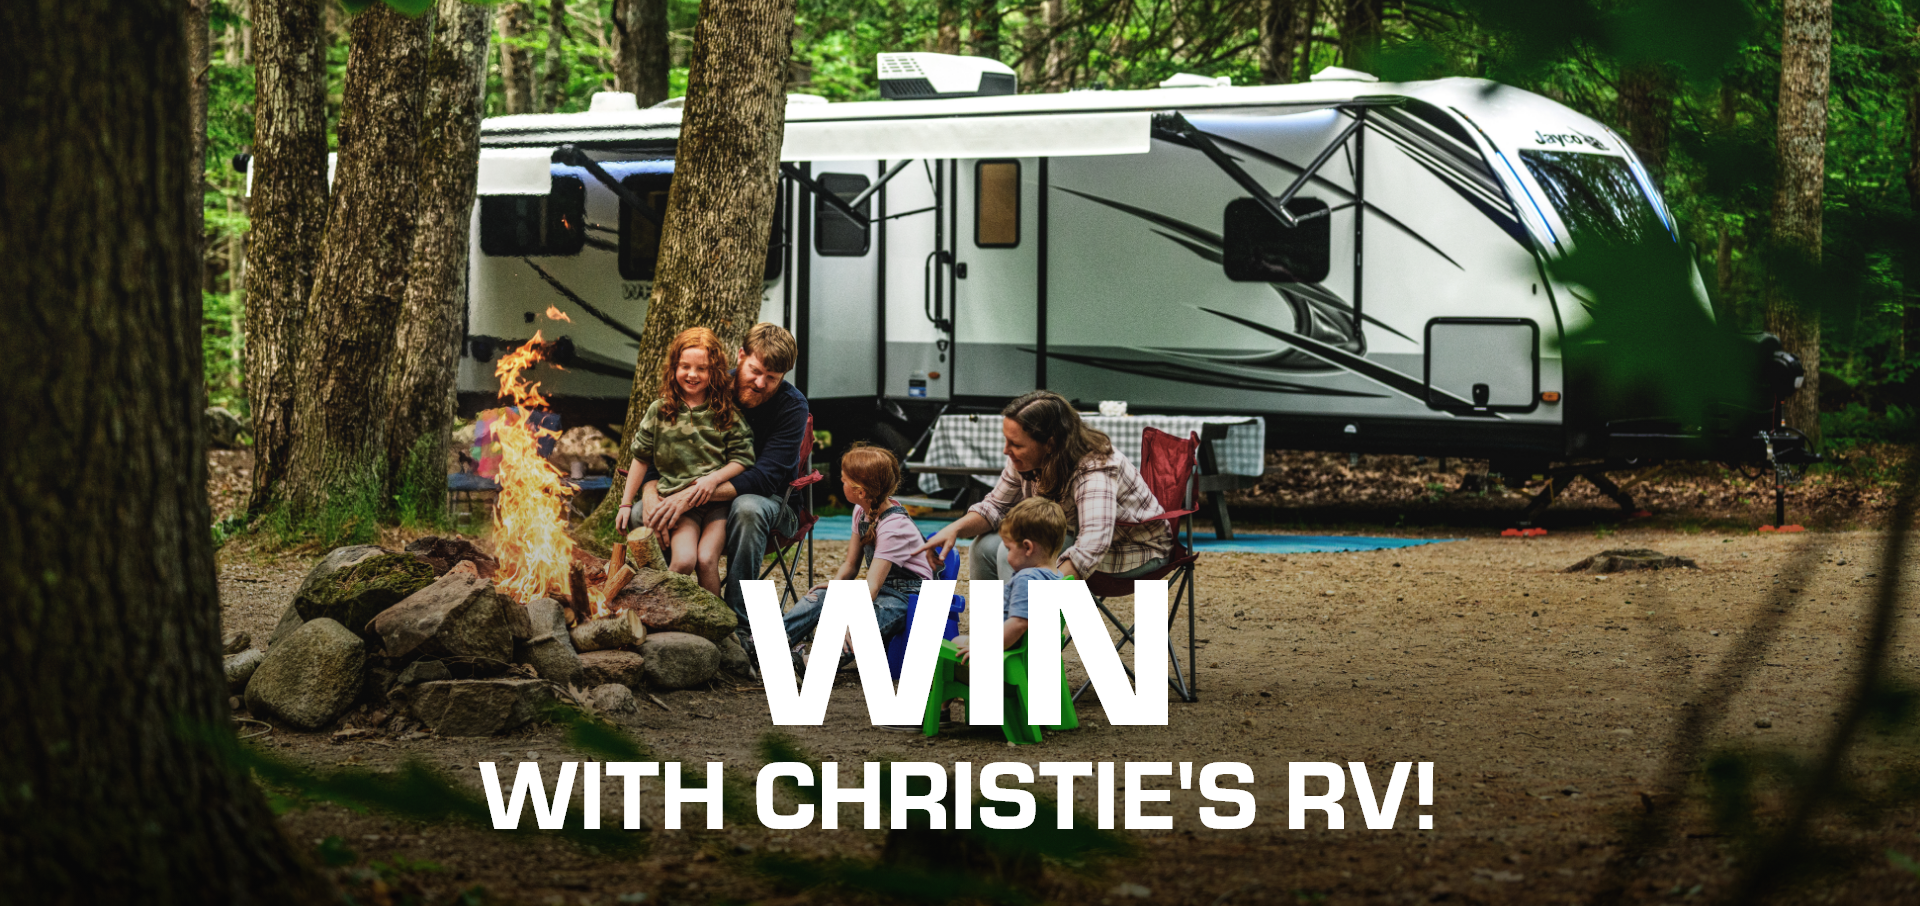 Enter to Win Prizes at Christie's RV